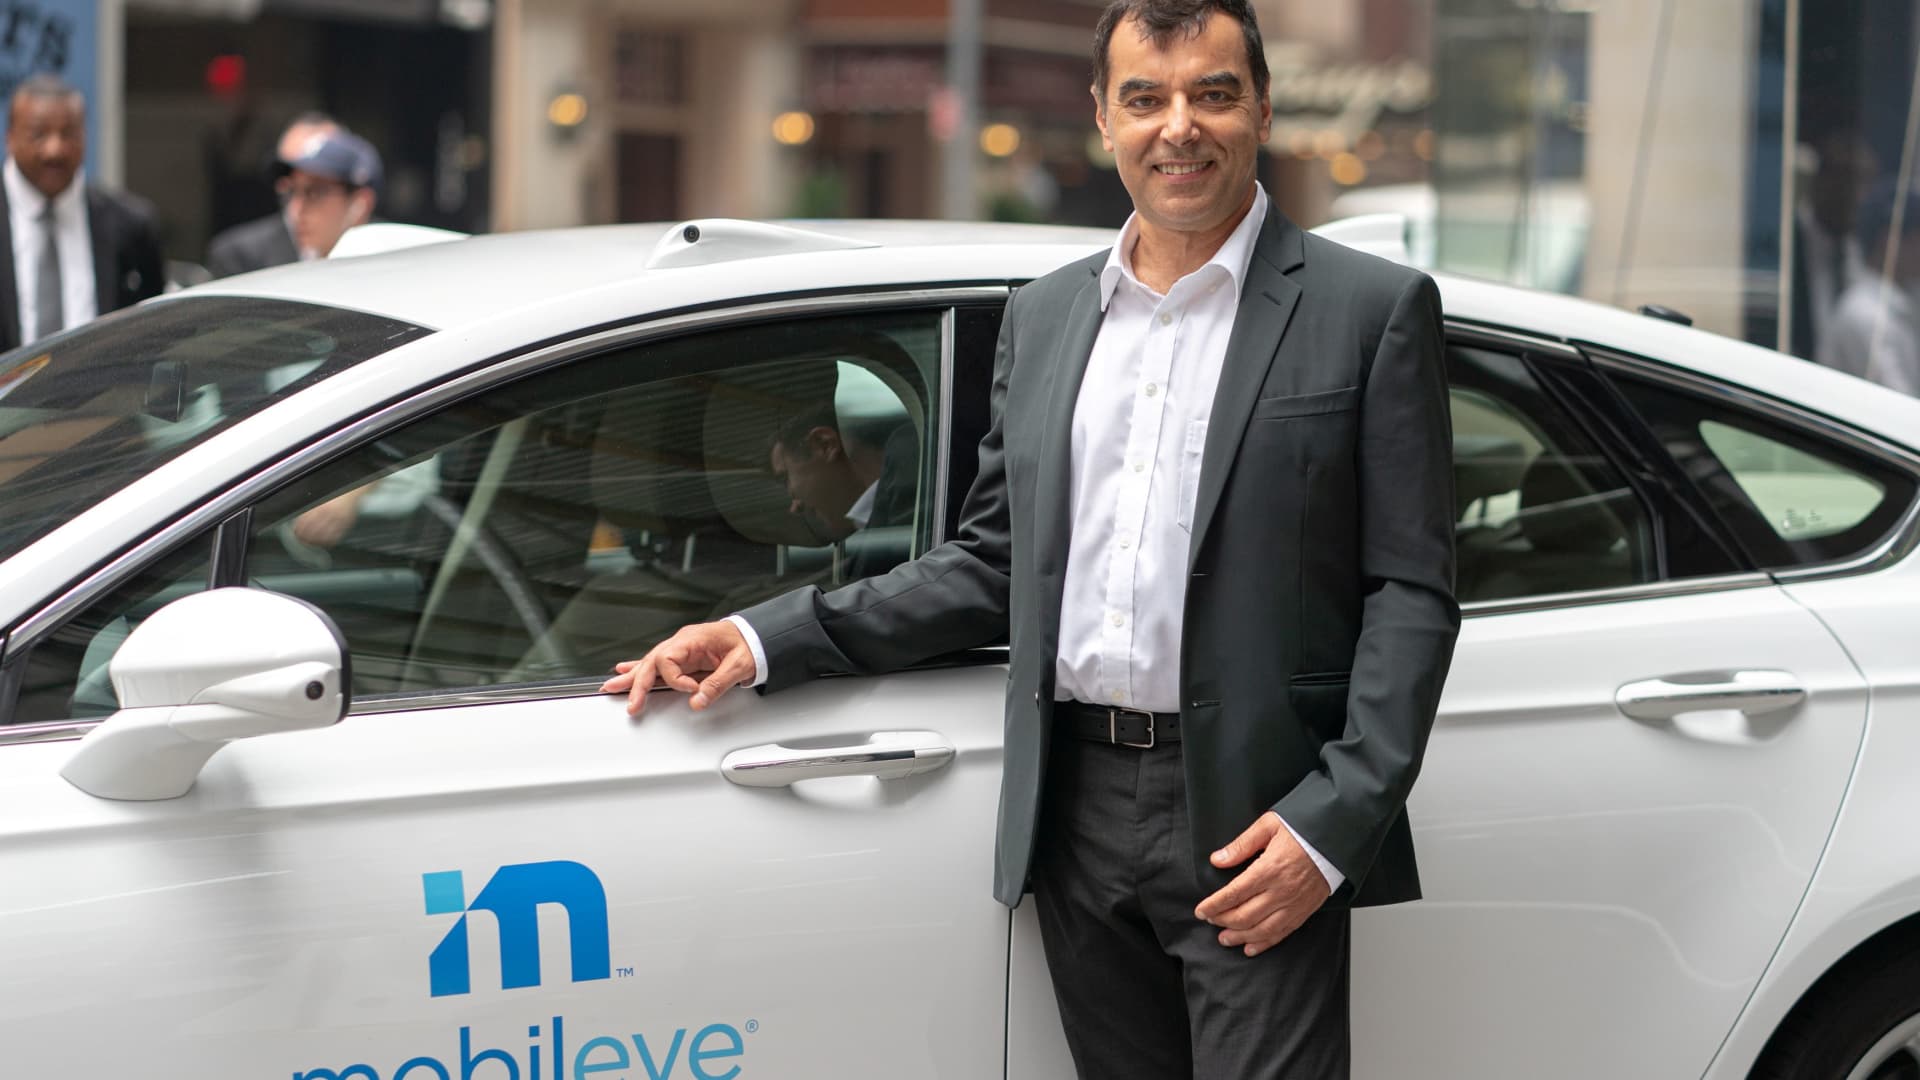 Intel-owned Mobileye files S-1 for IPO